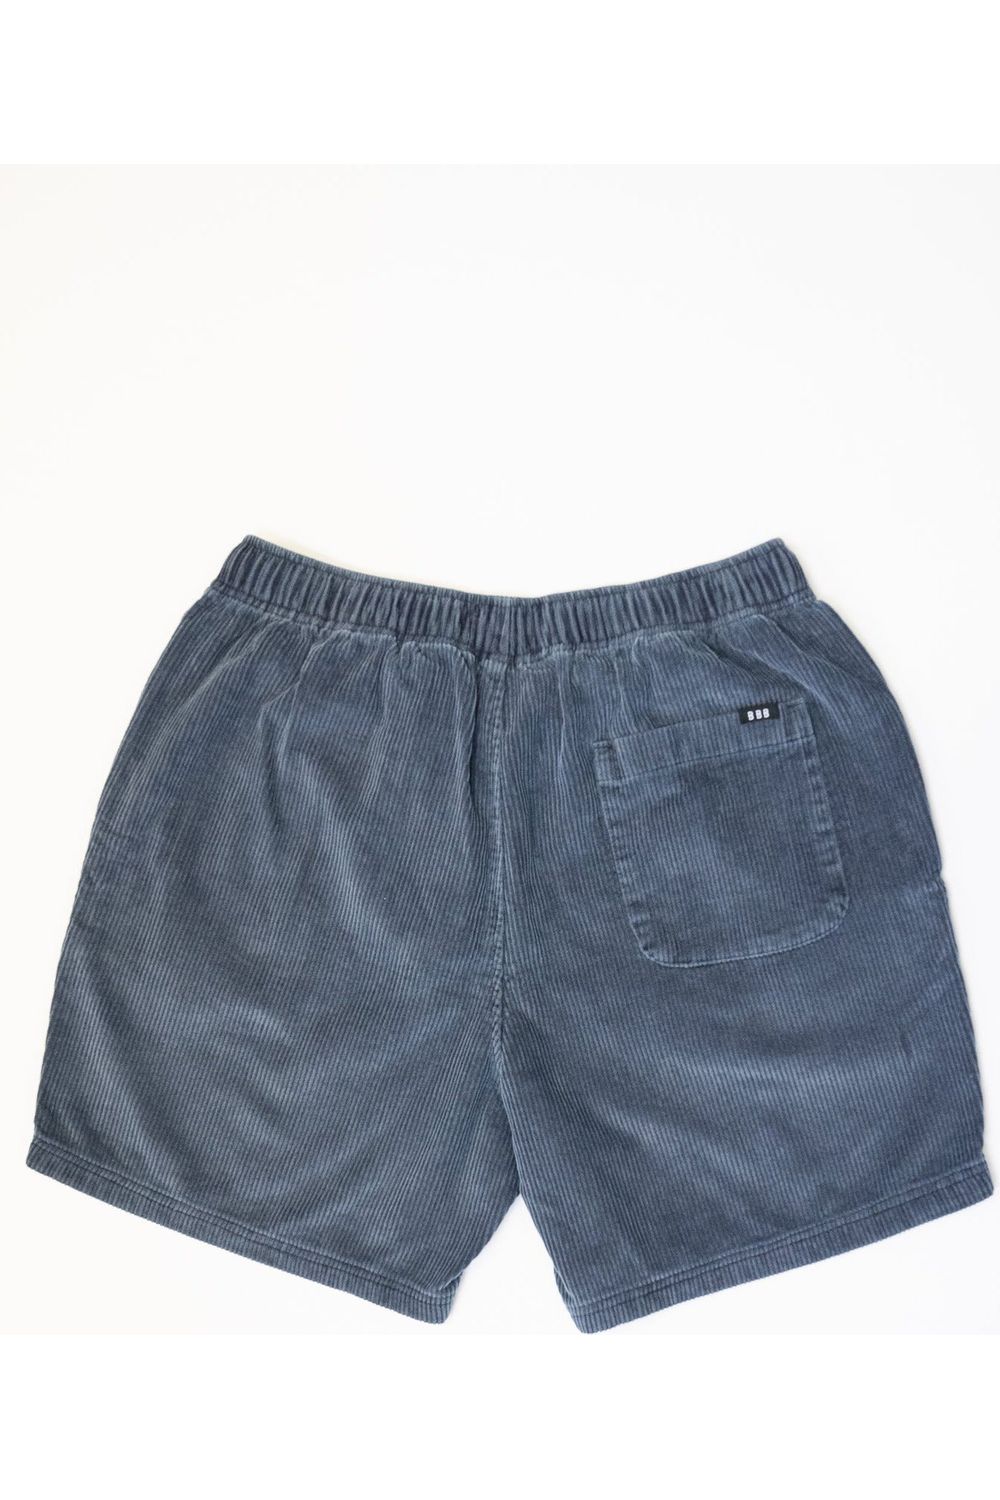 Bamboobay cord shorts in navy showing full back in studio